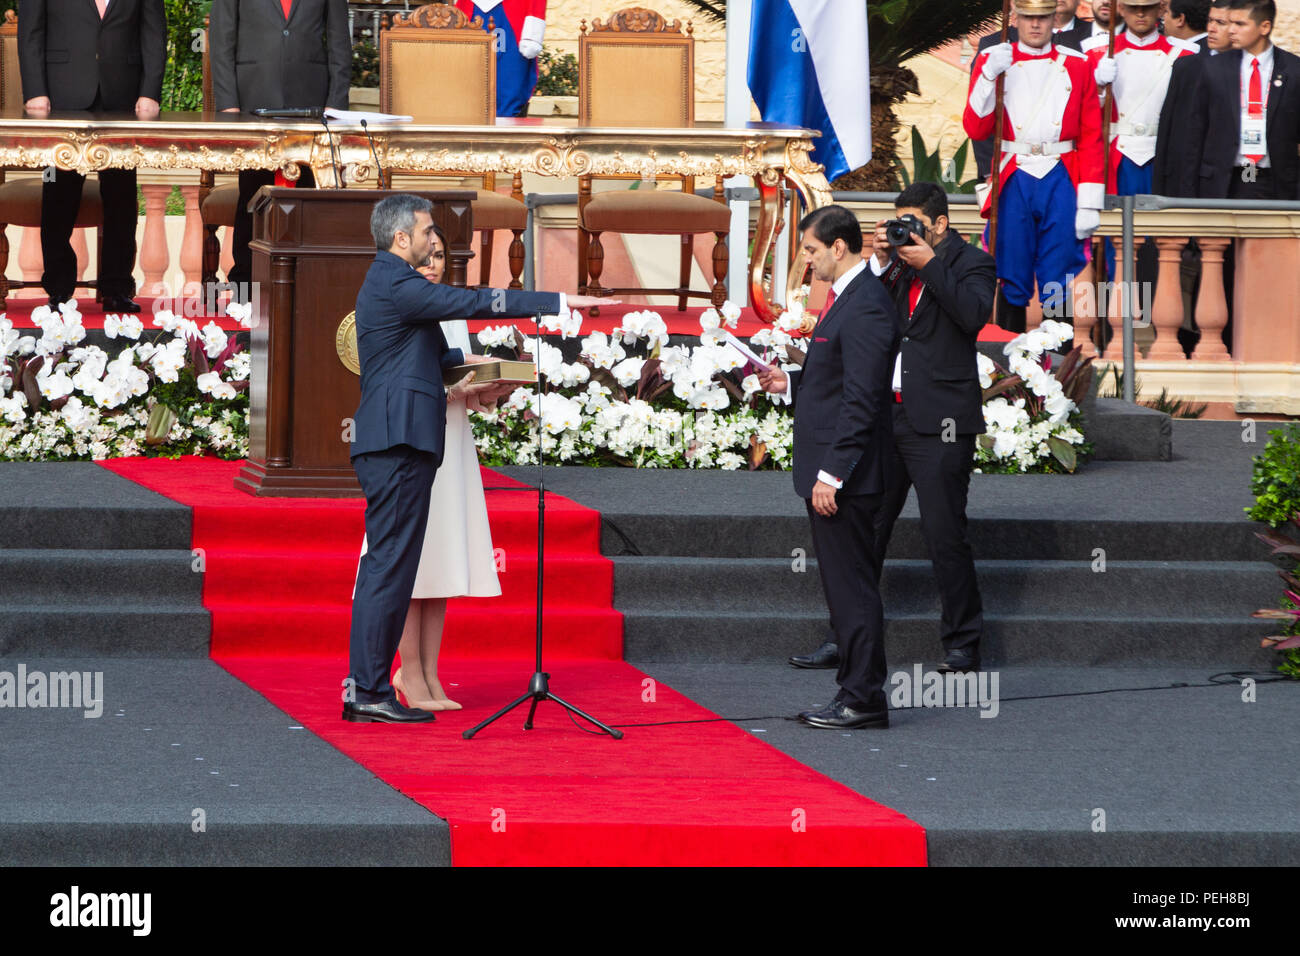 Asuncion, Paraguay. 15th Aug, 2018. Paraguay's new President Mario Abdo Benítez sworn-in by the president of the Paraguayan Congress Silvio Ovelar, during his inauguration ceremony at the esplanade of the Palace of Lopez in Asuncion, Paraguay. Credit: Andre M. Chang/Alamy Live News Stock Photo